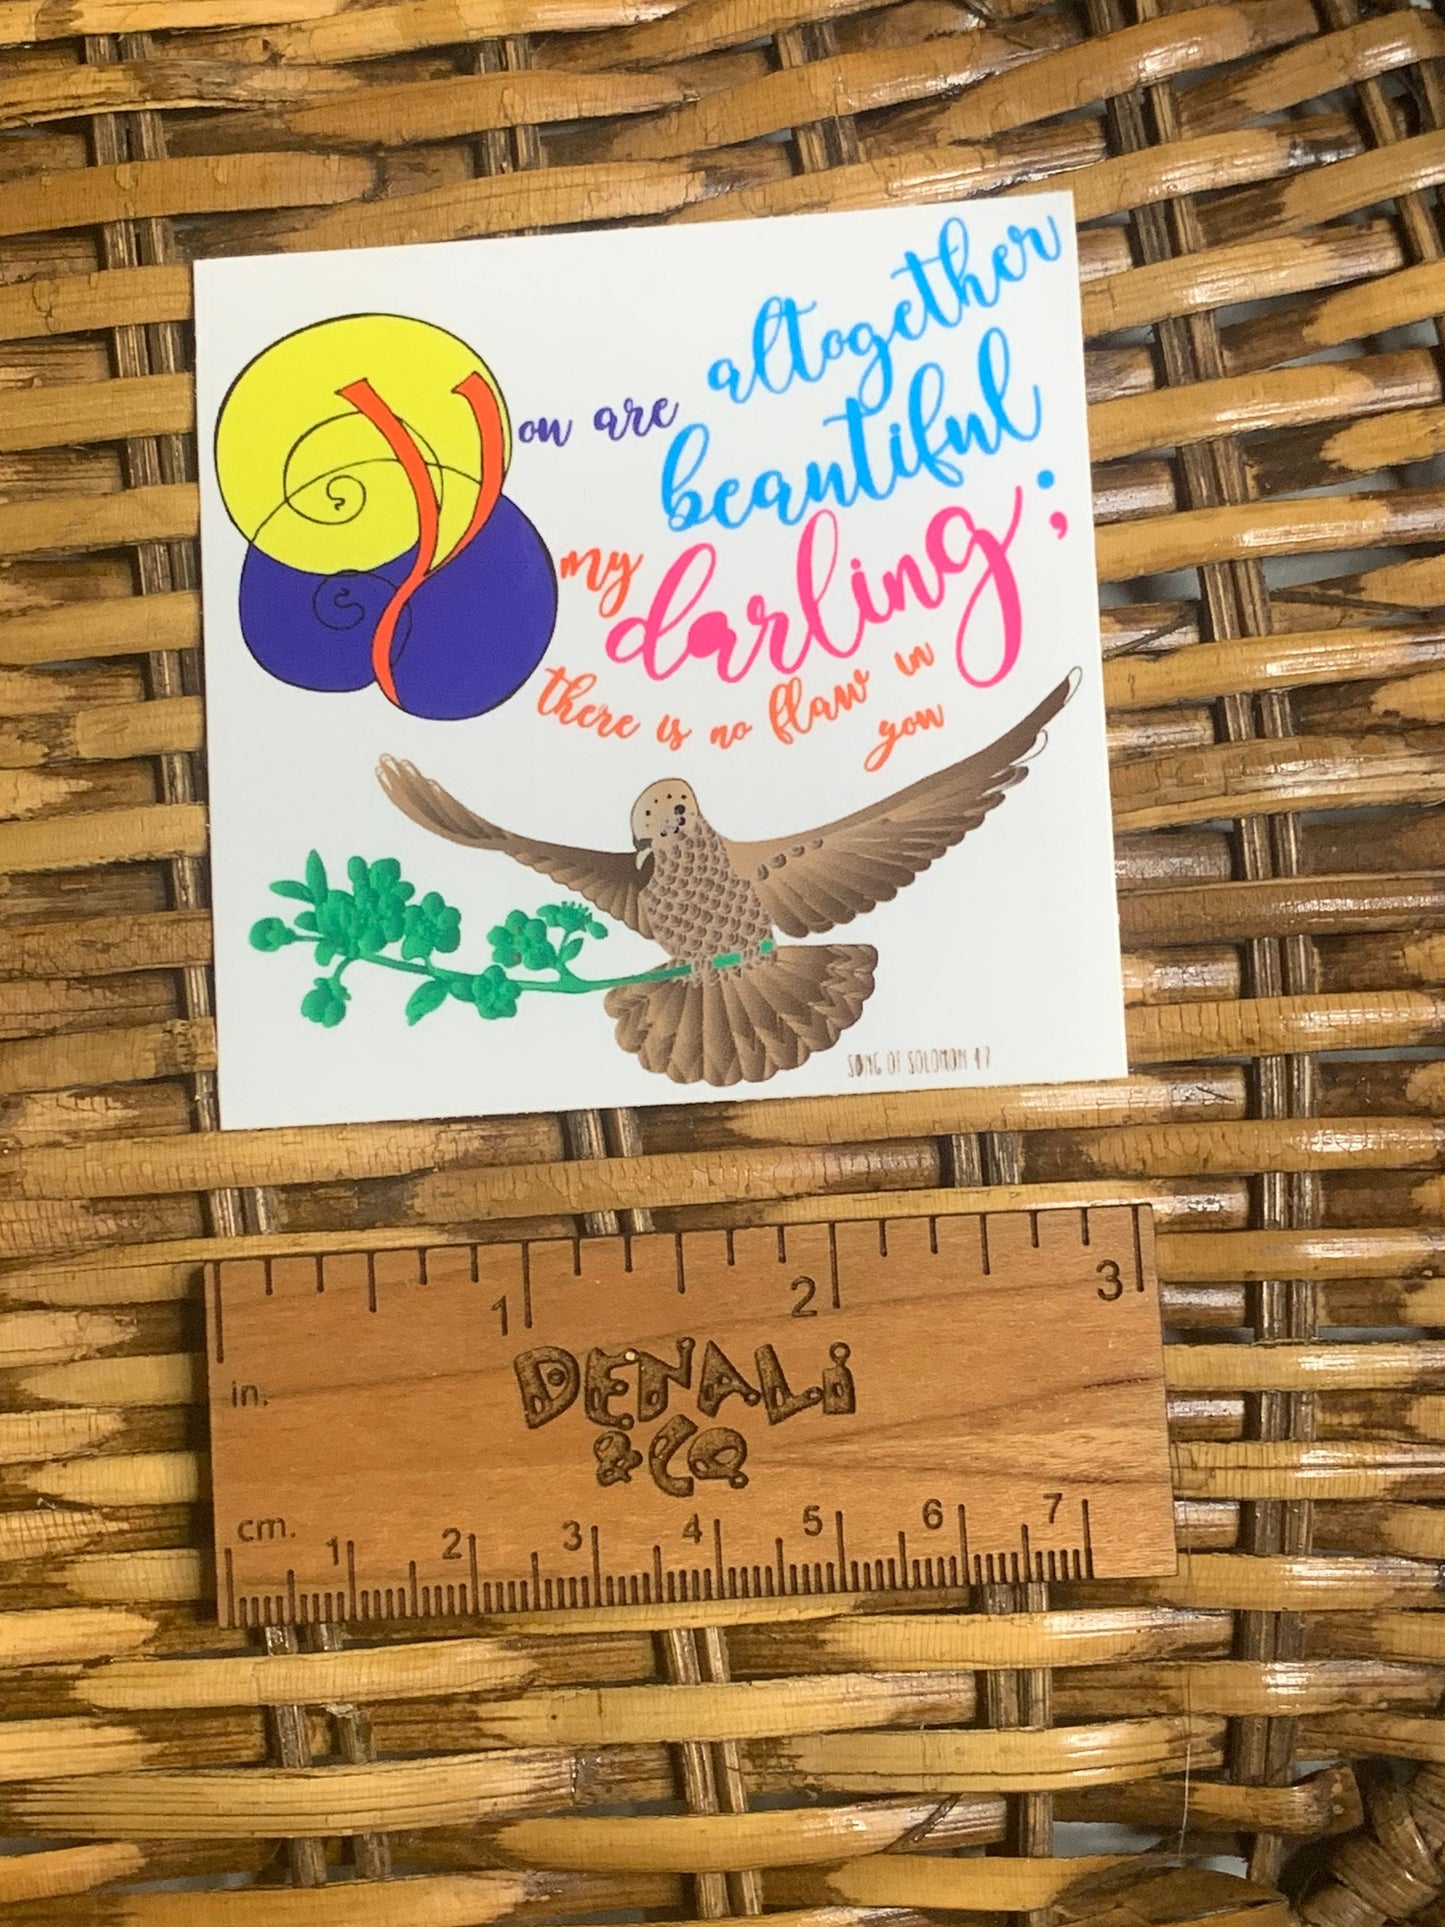 You Are Altogether Beautiful My Darling, There Is No Flaw In You Vinyl Sticker, Vinyl Decal, Laptop Sticker, Recovery Sticker, Encouragement